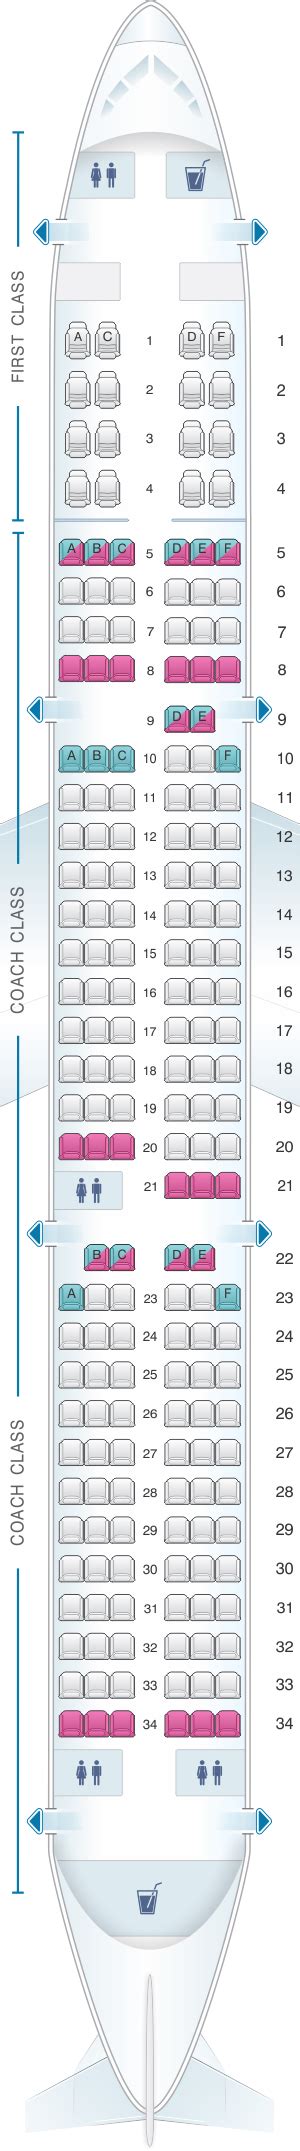 Planes & Seat Maps > Airbus A321-200 (321) Layout 1; Vietnam Airlines Seat Maps. Airbus A321-200 (321) Layout 1. Overview; Planes & Seat Maps. ATR 72-500 (AT7). 